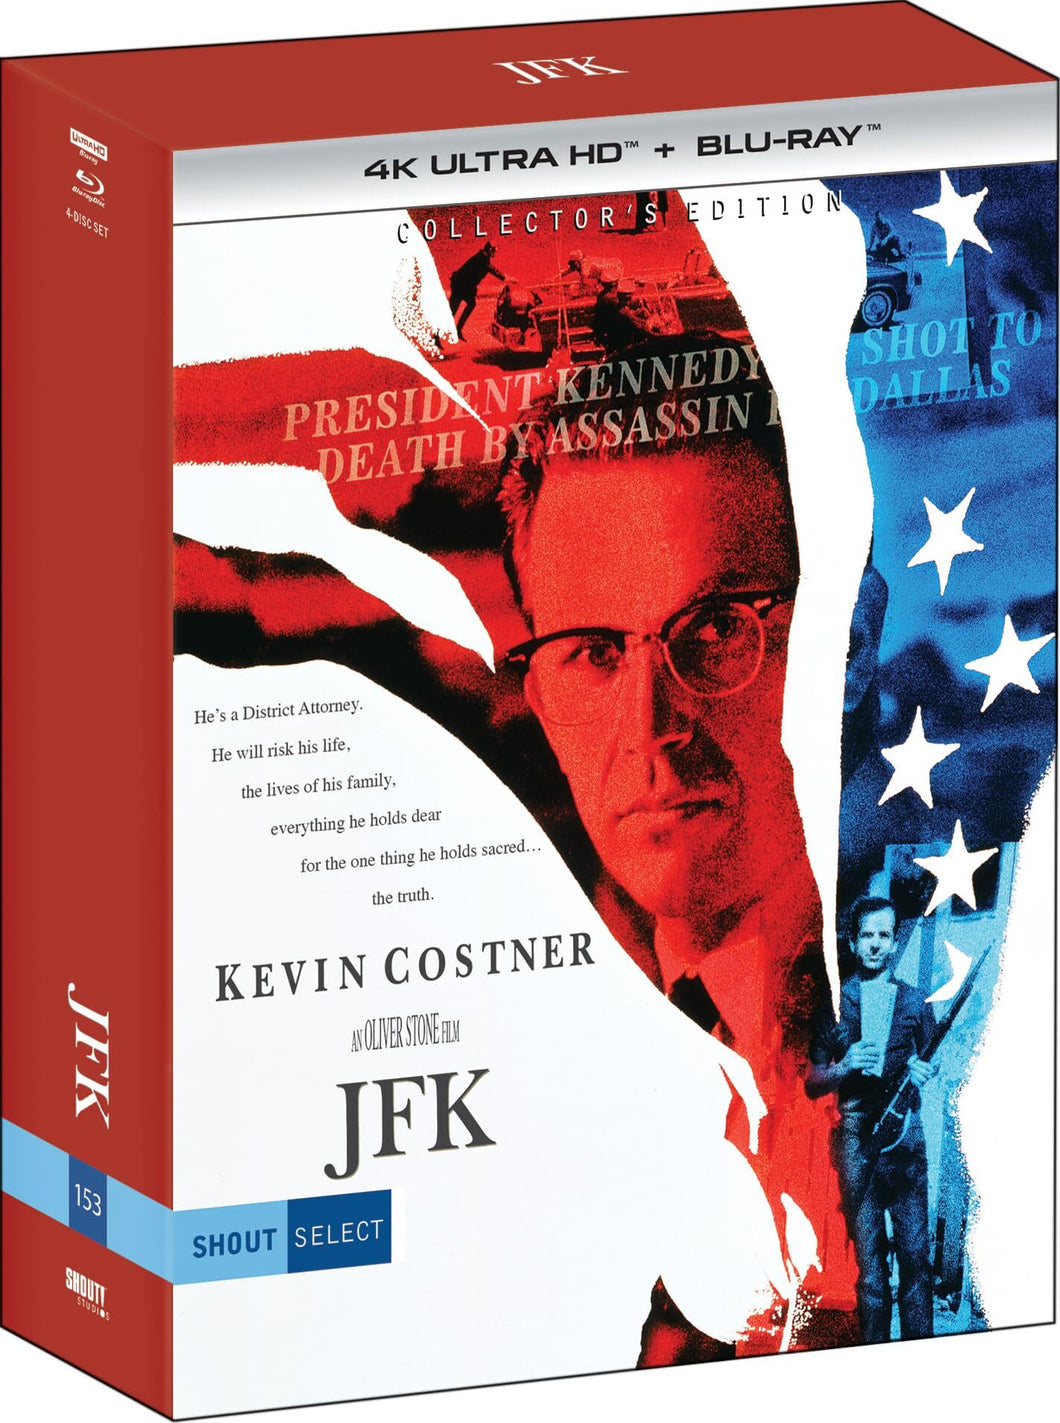 JFK 4K Collector's Edition (1991) - front cover